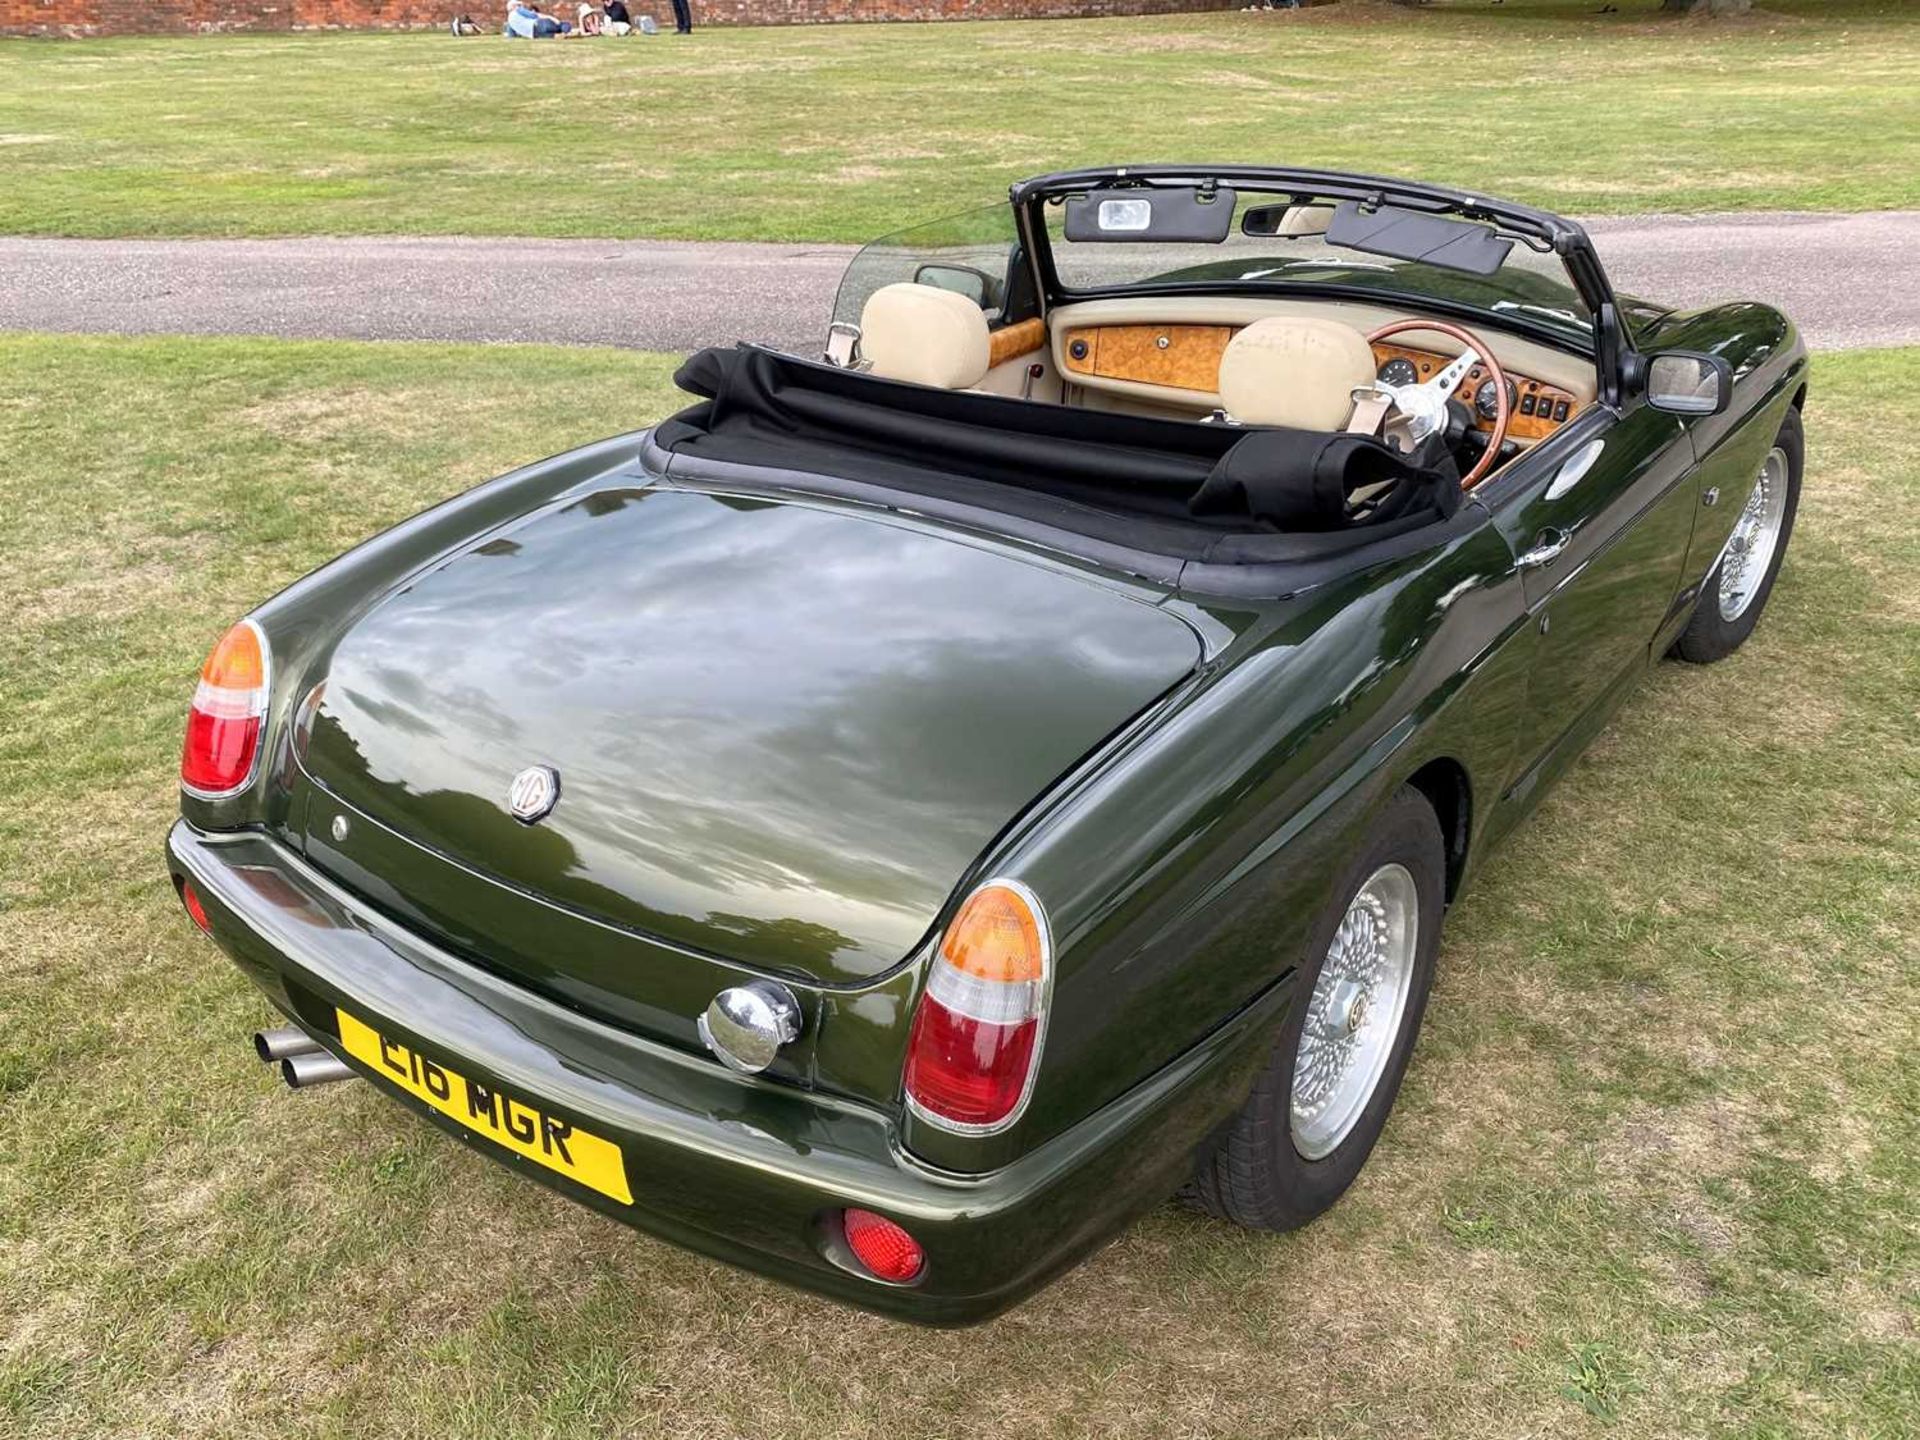 1995 MG RV8 A rare and sought-after car fitted with power steering - Image 19 of 45